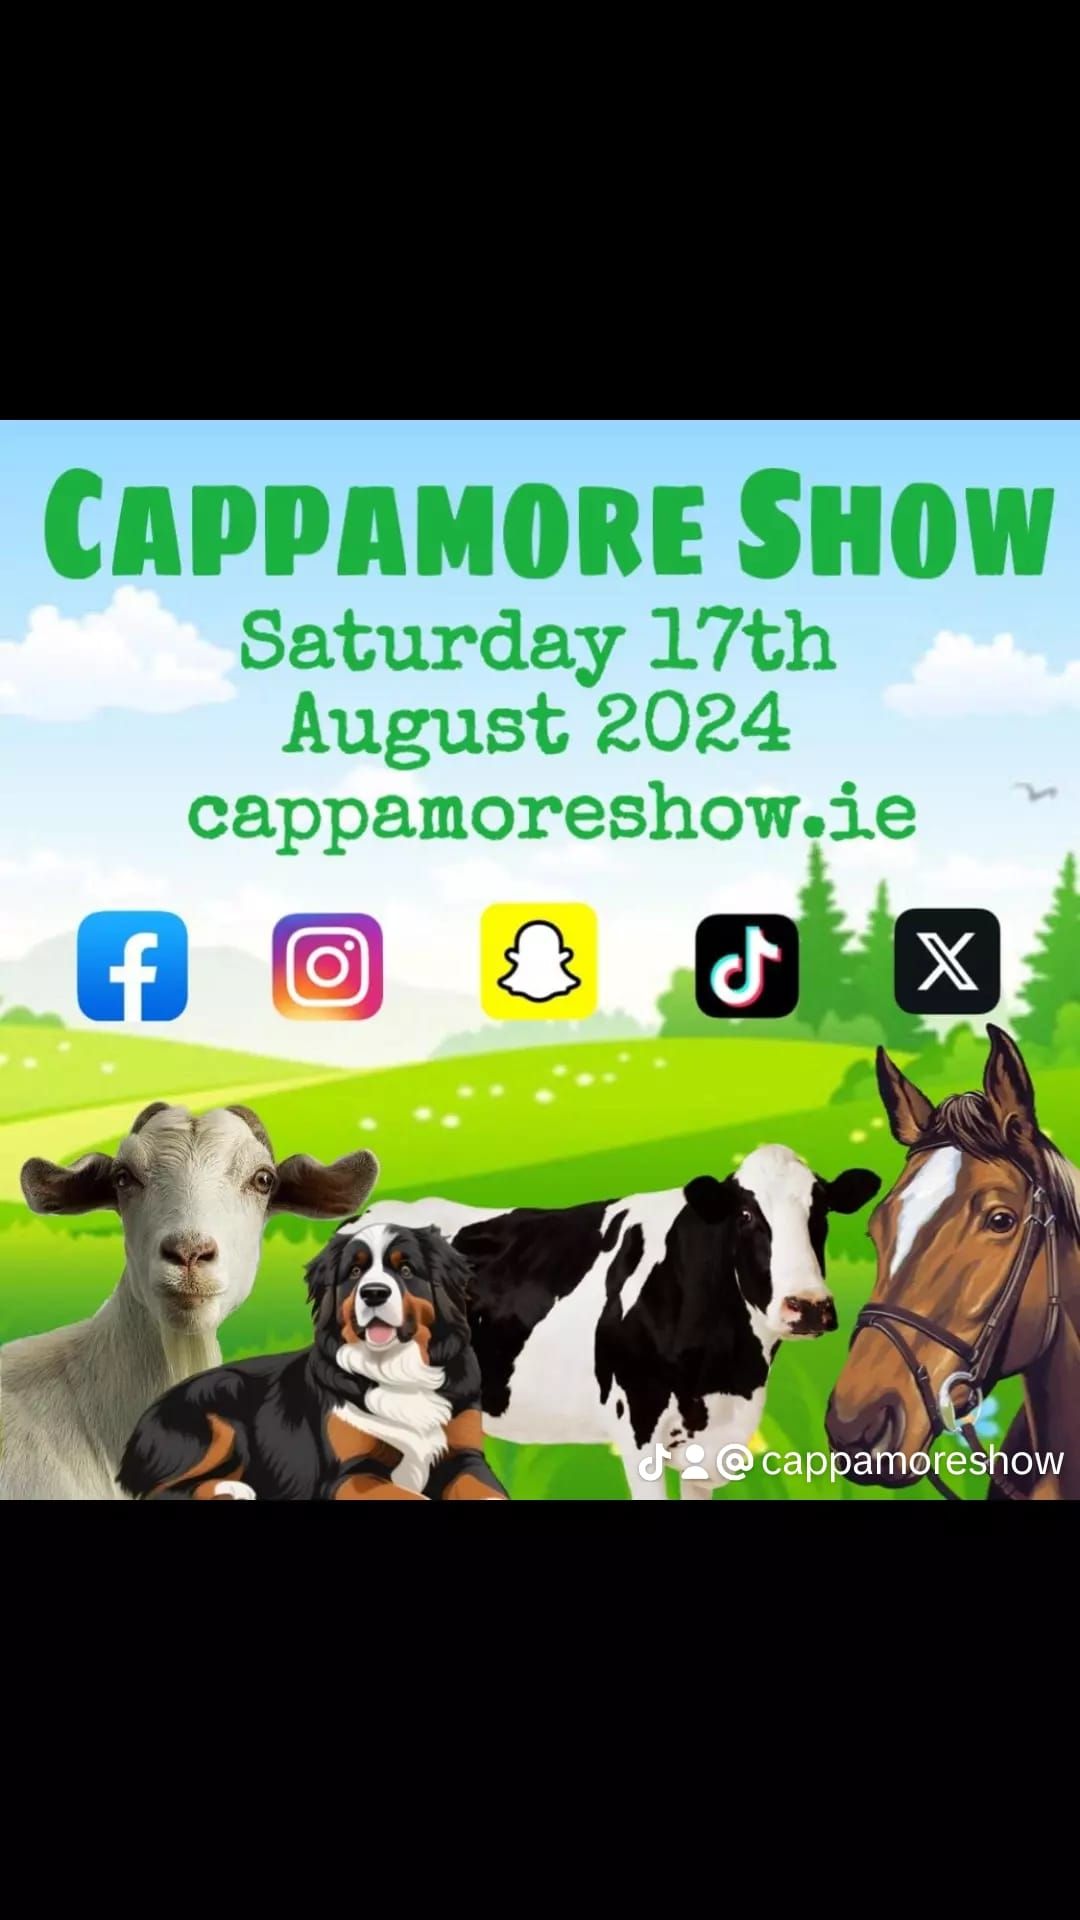 Cappamore Show 2024